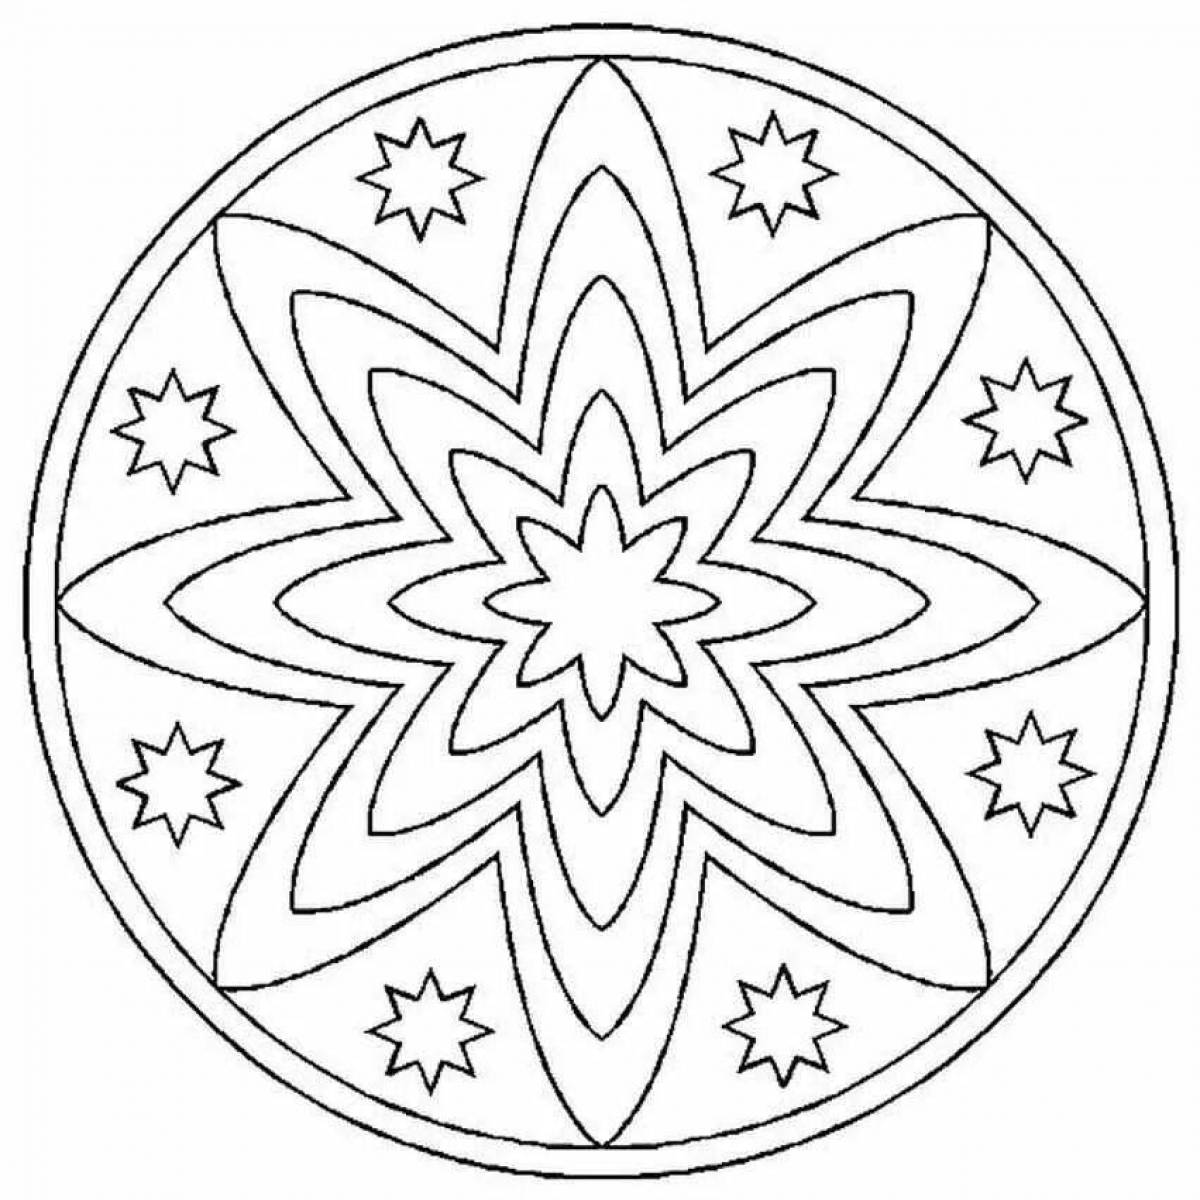 Fabulous coloring pages with Christmas patterns